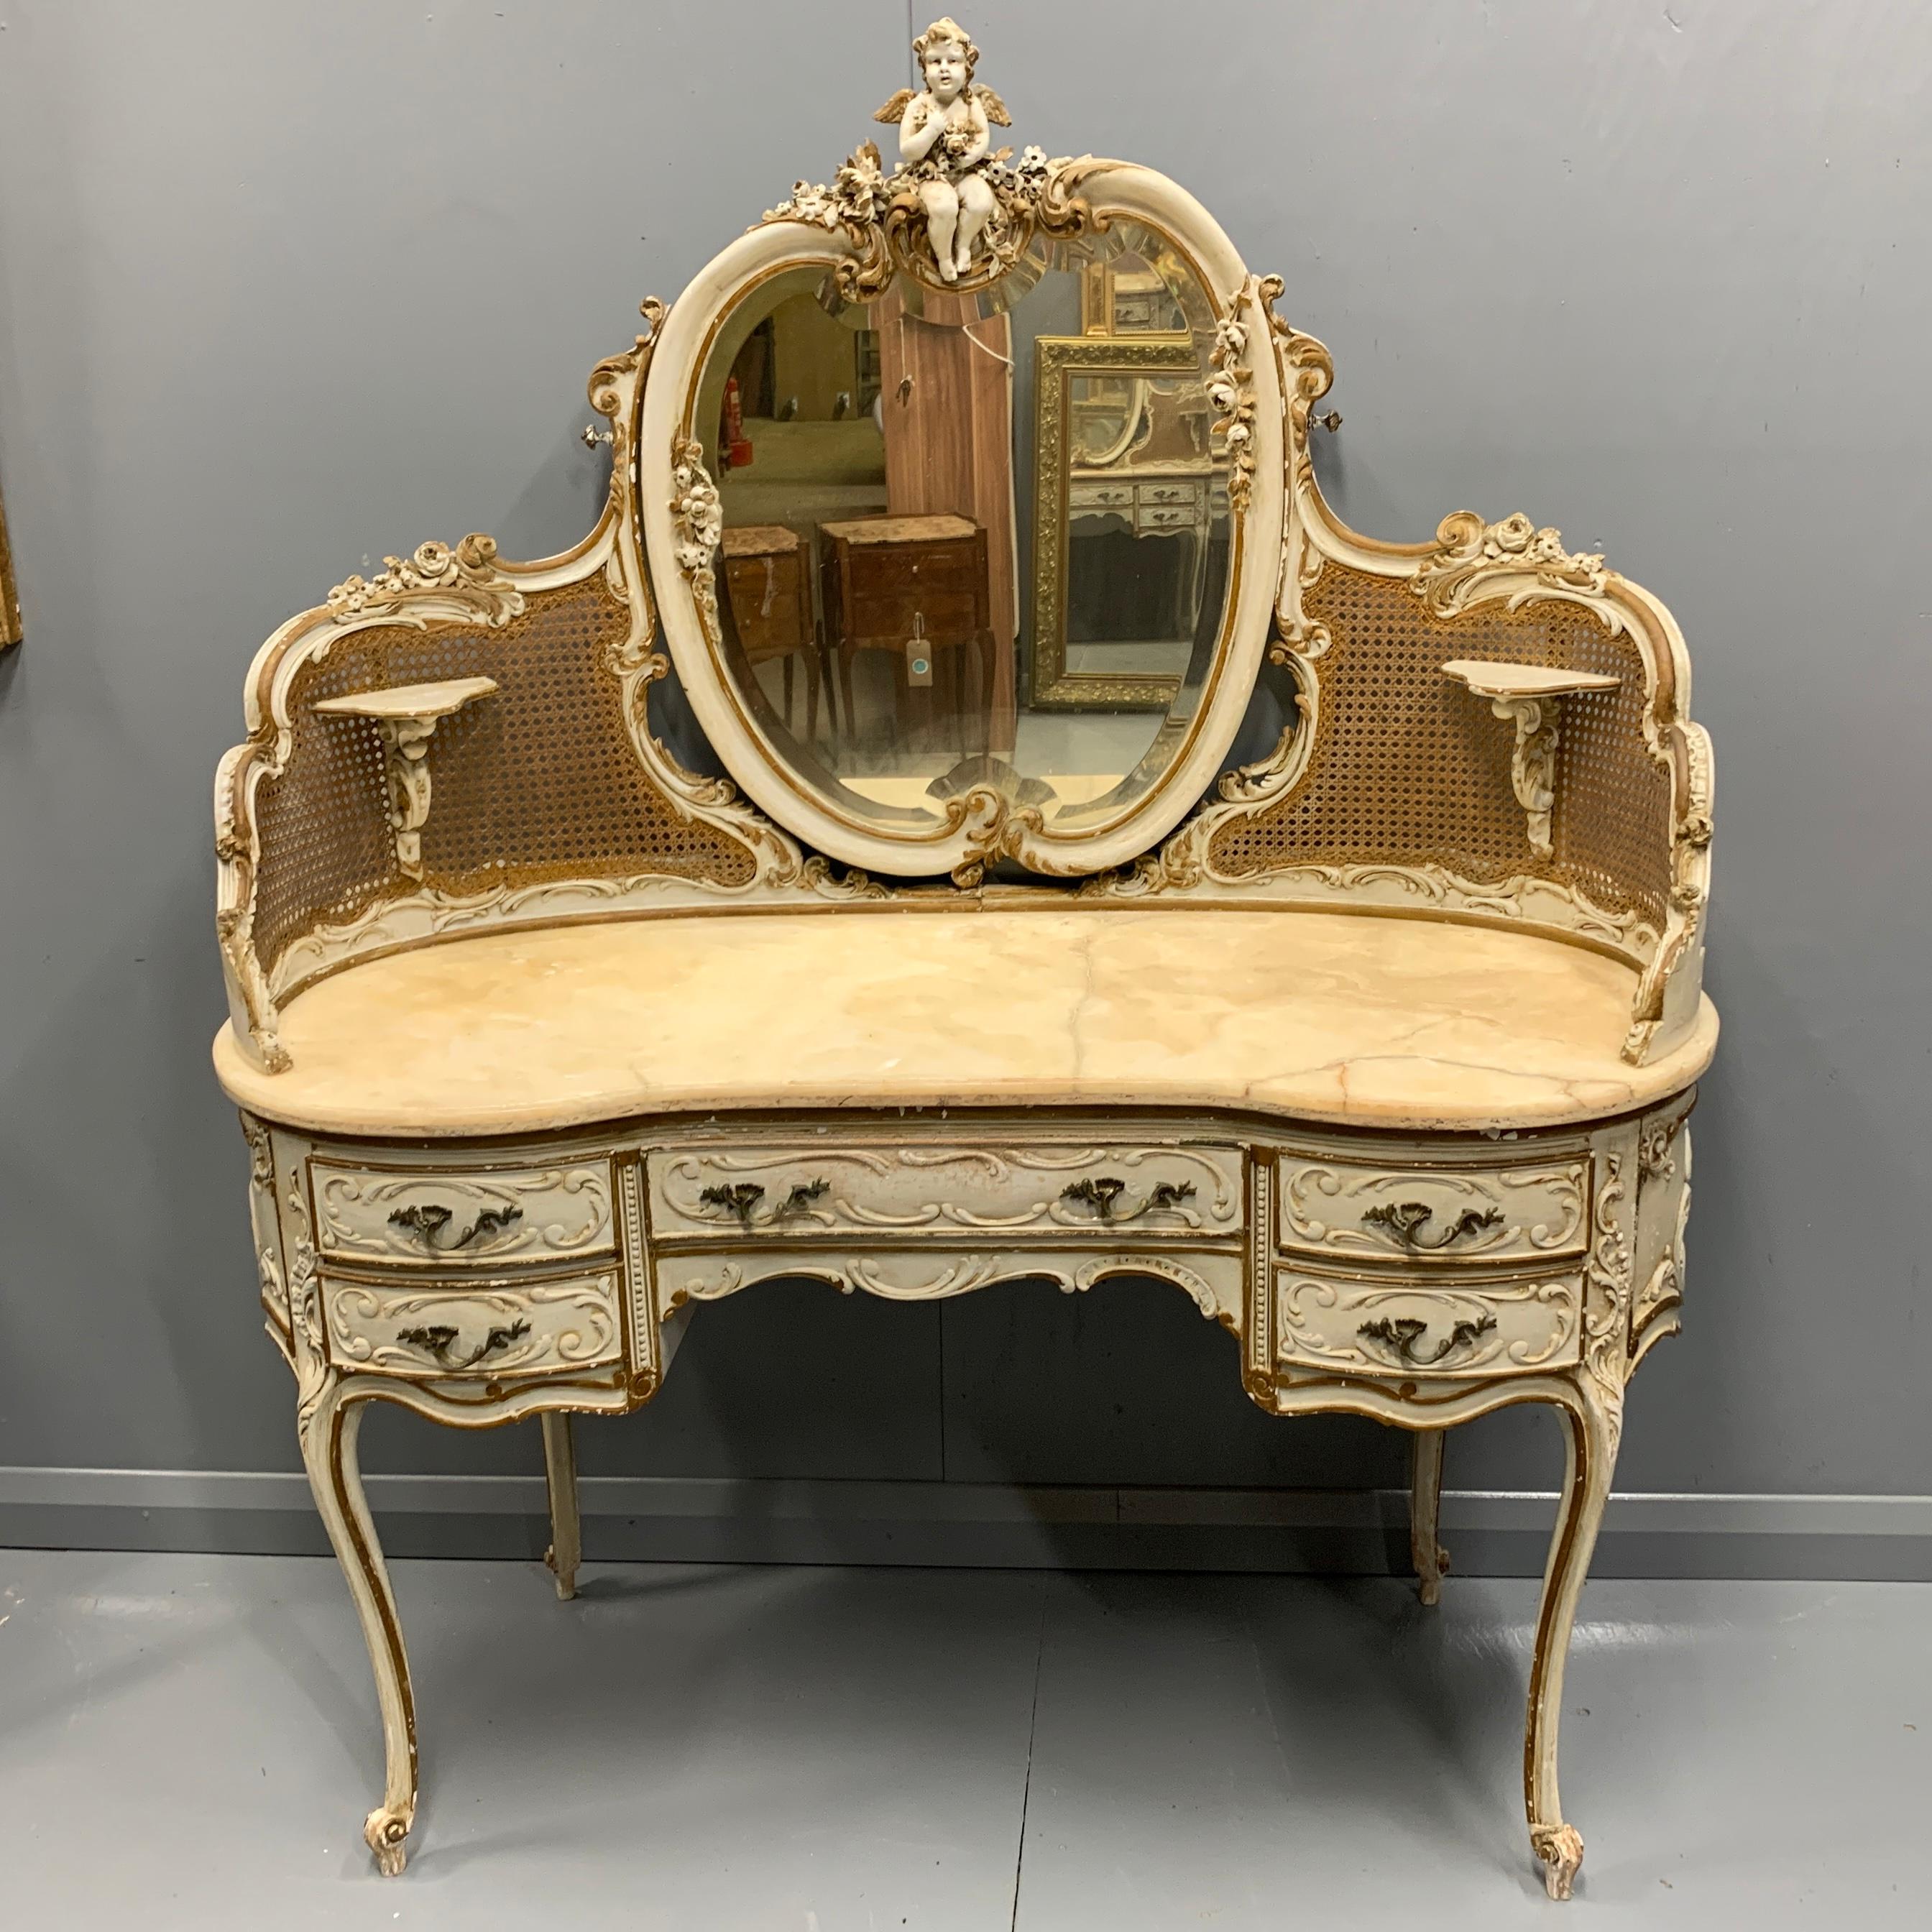 A very unusual and grand scale Italian dressing table in its original paint and bronzed gilt highlighting, original cane and bevelled mirror plate, circa 1900.
Certainly a decorative piece but also super practical, giving you plenty of surface